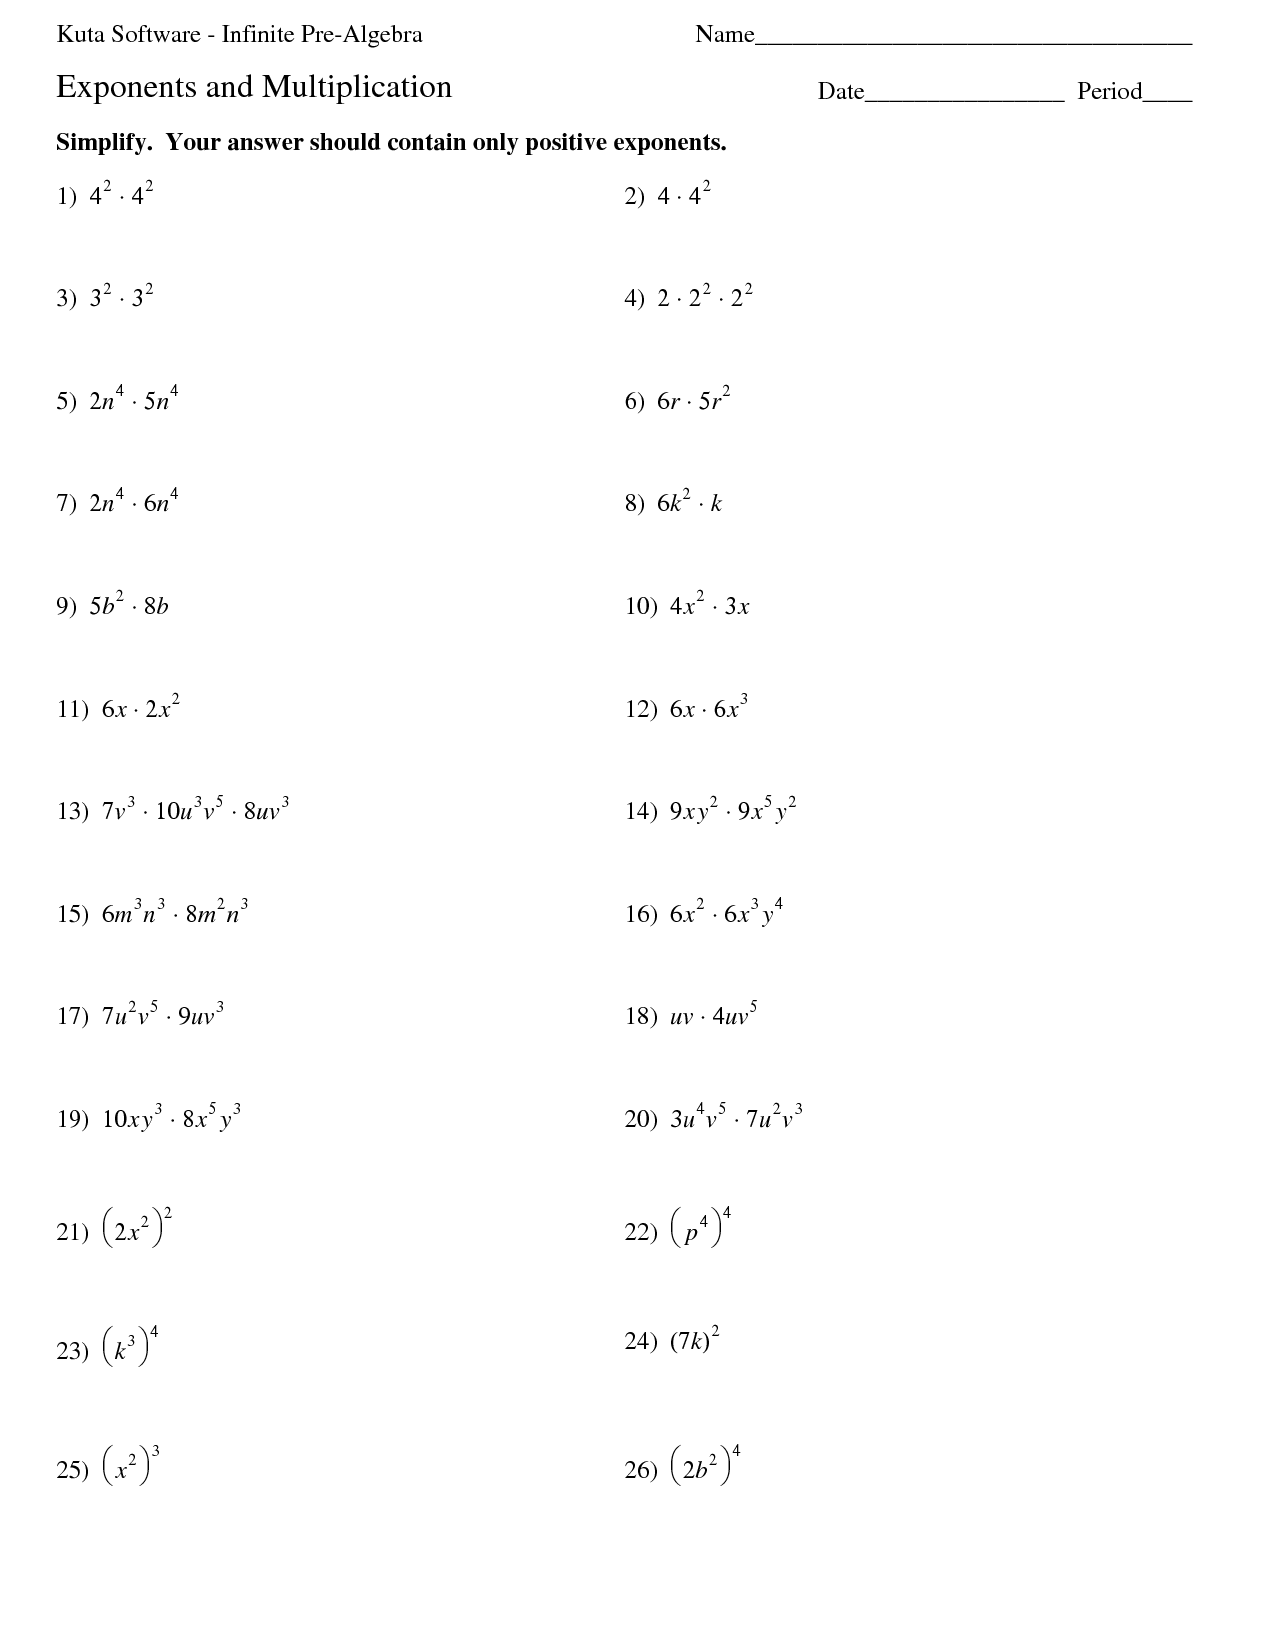 Properties of Exponents Worksheet and Answers Image